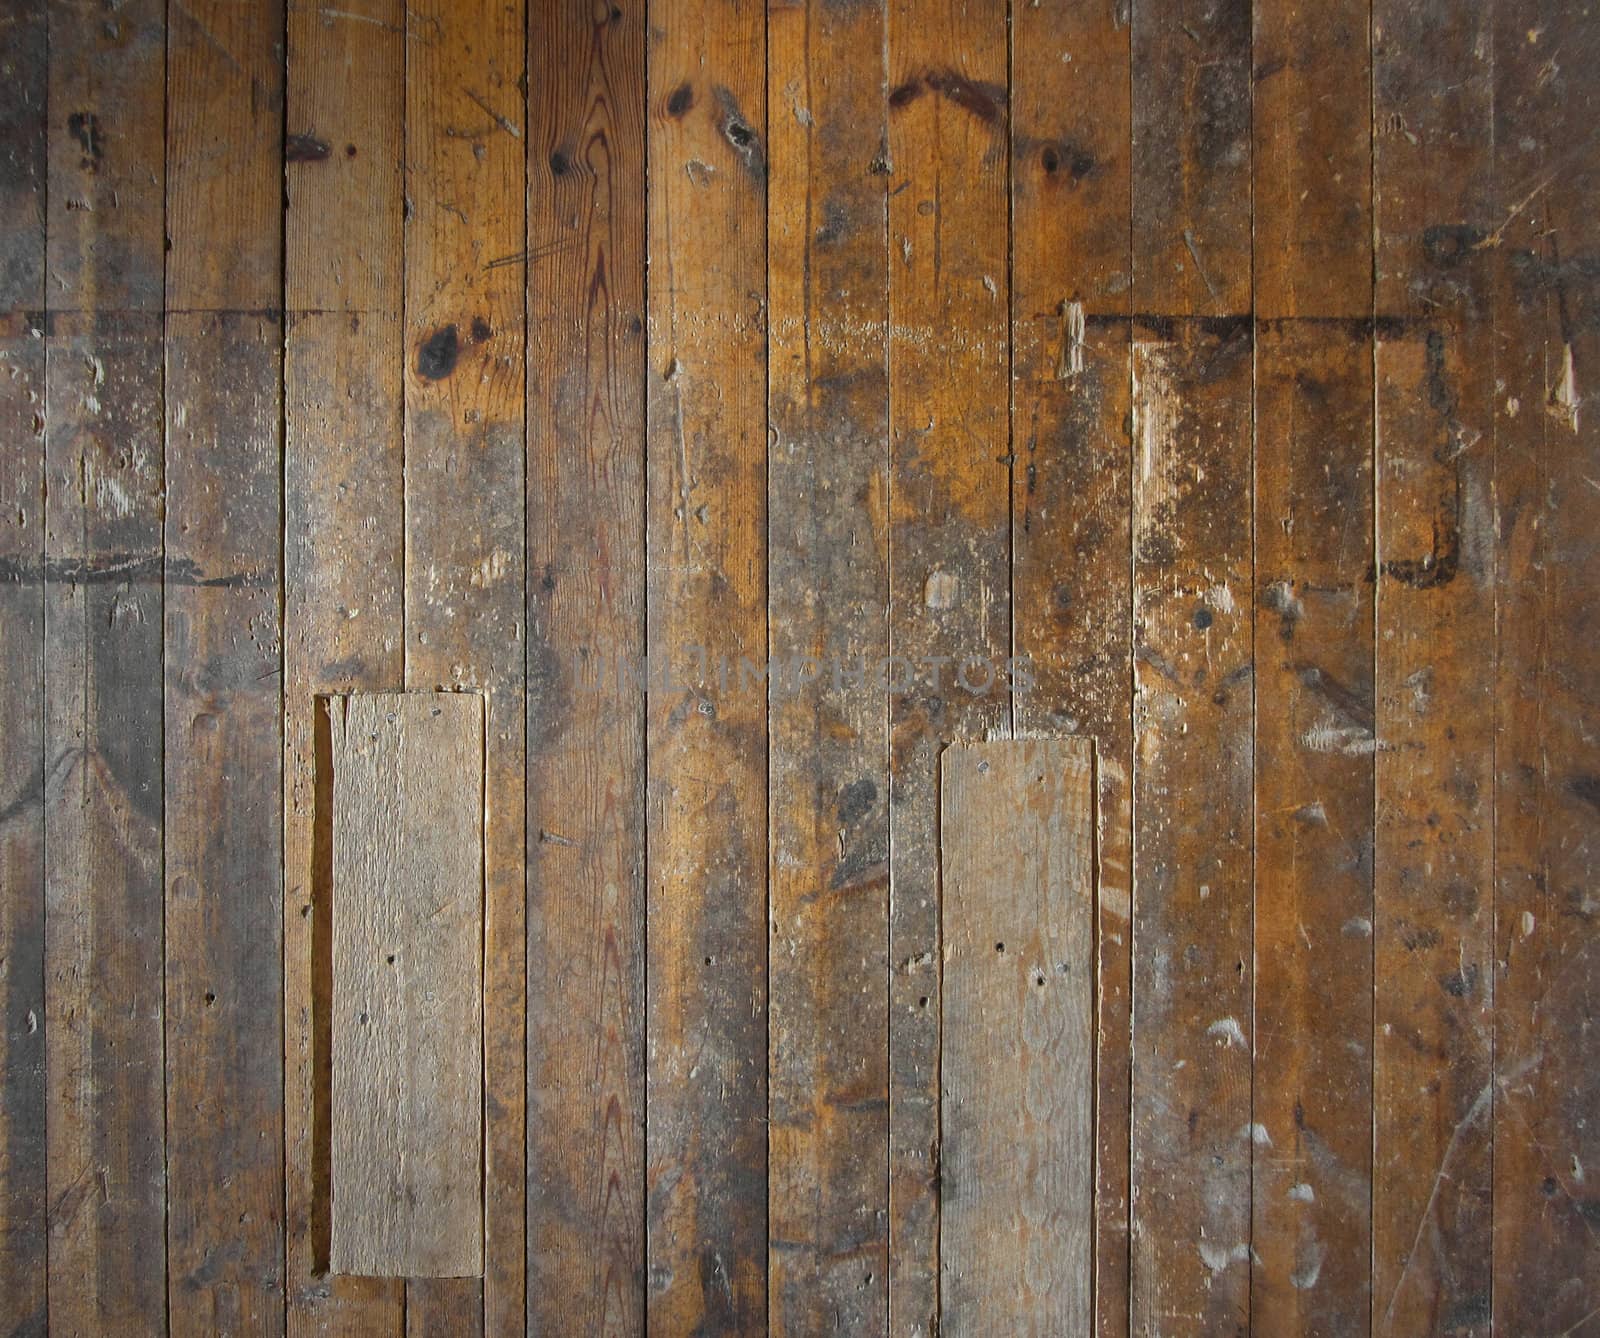 Old wooden floor or wall by anterovium